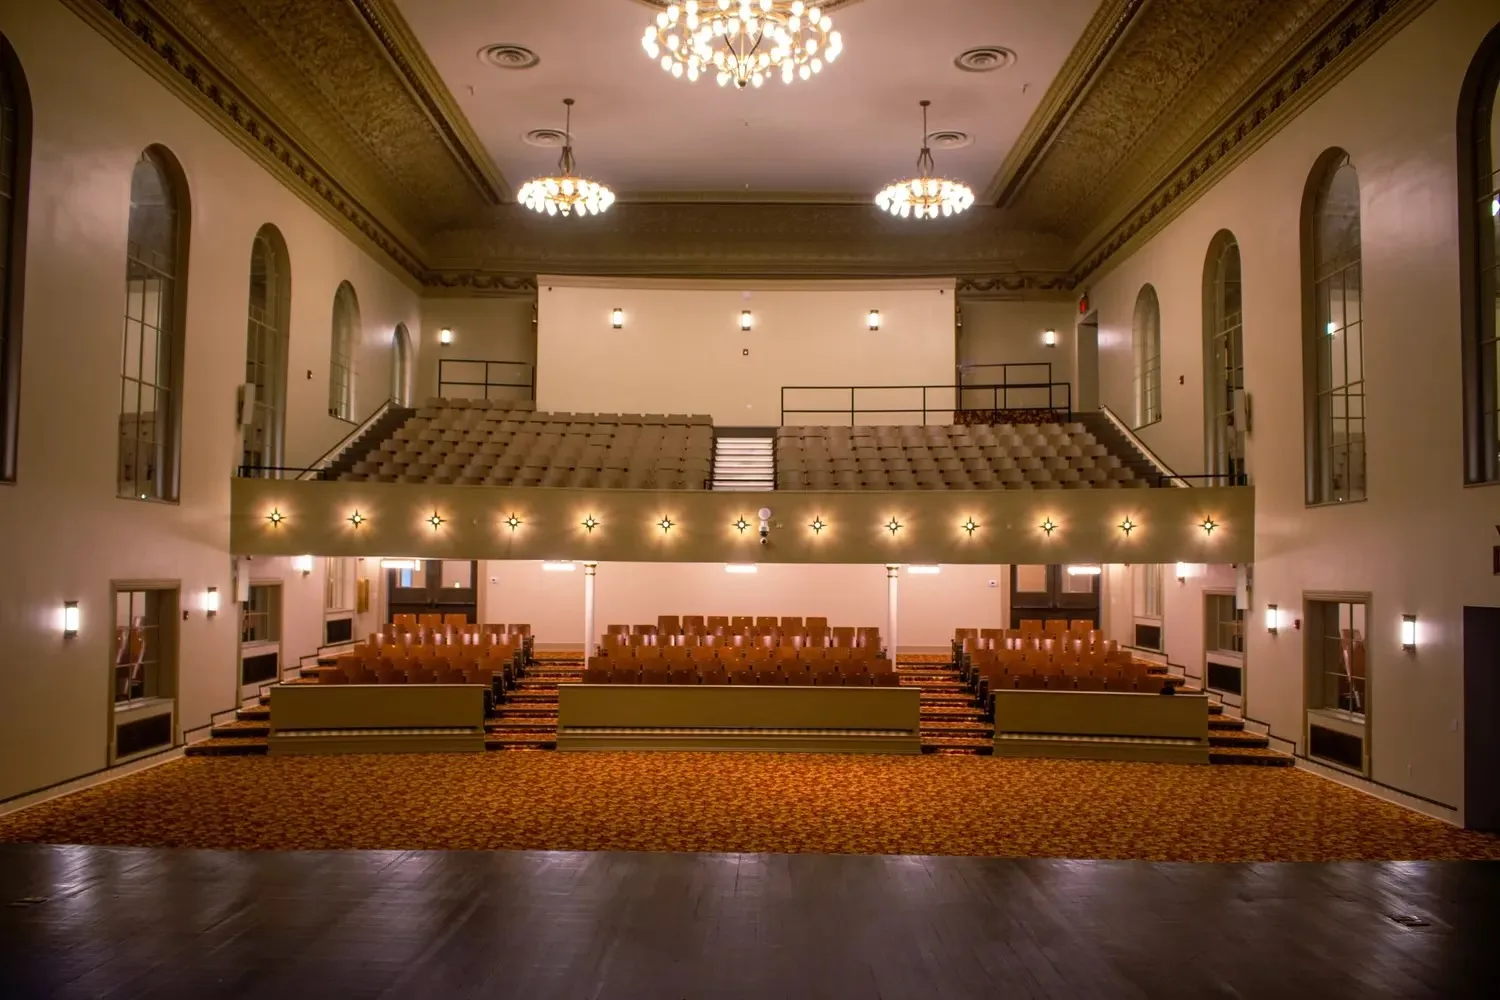 The Emmaus Center is housed in a former opera house in Brooklyn, New York.?w=200&h=150